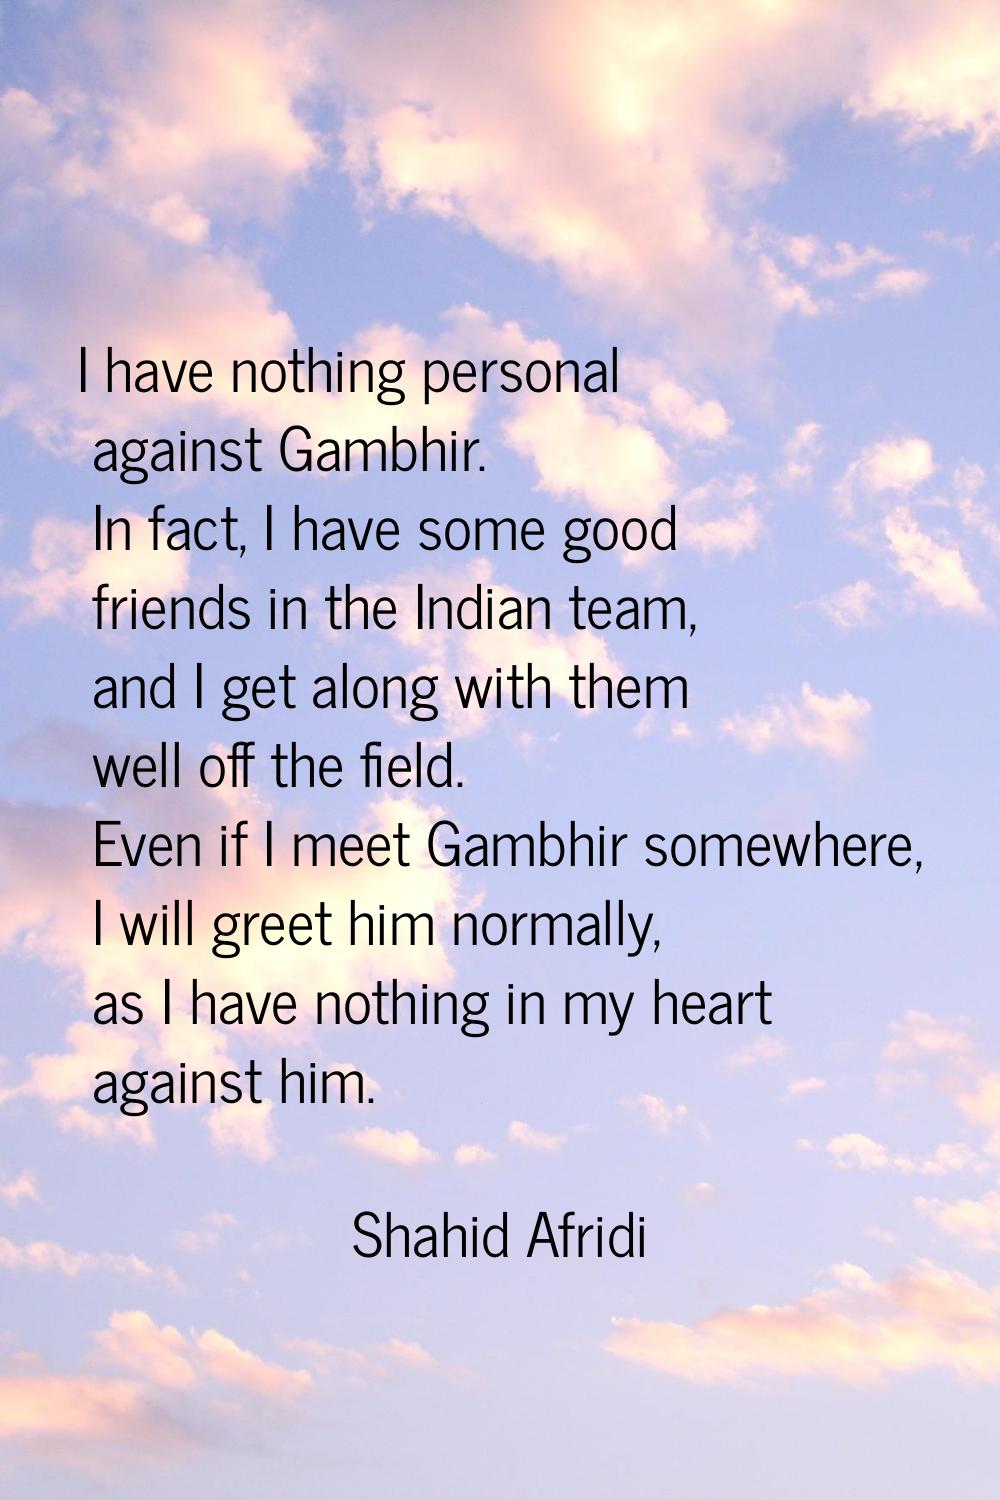 I have nothing personal against Gambhir. In fact, I have some good friends in the Indian team, and 